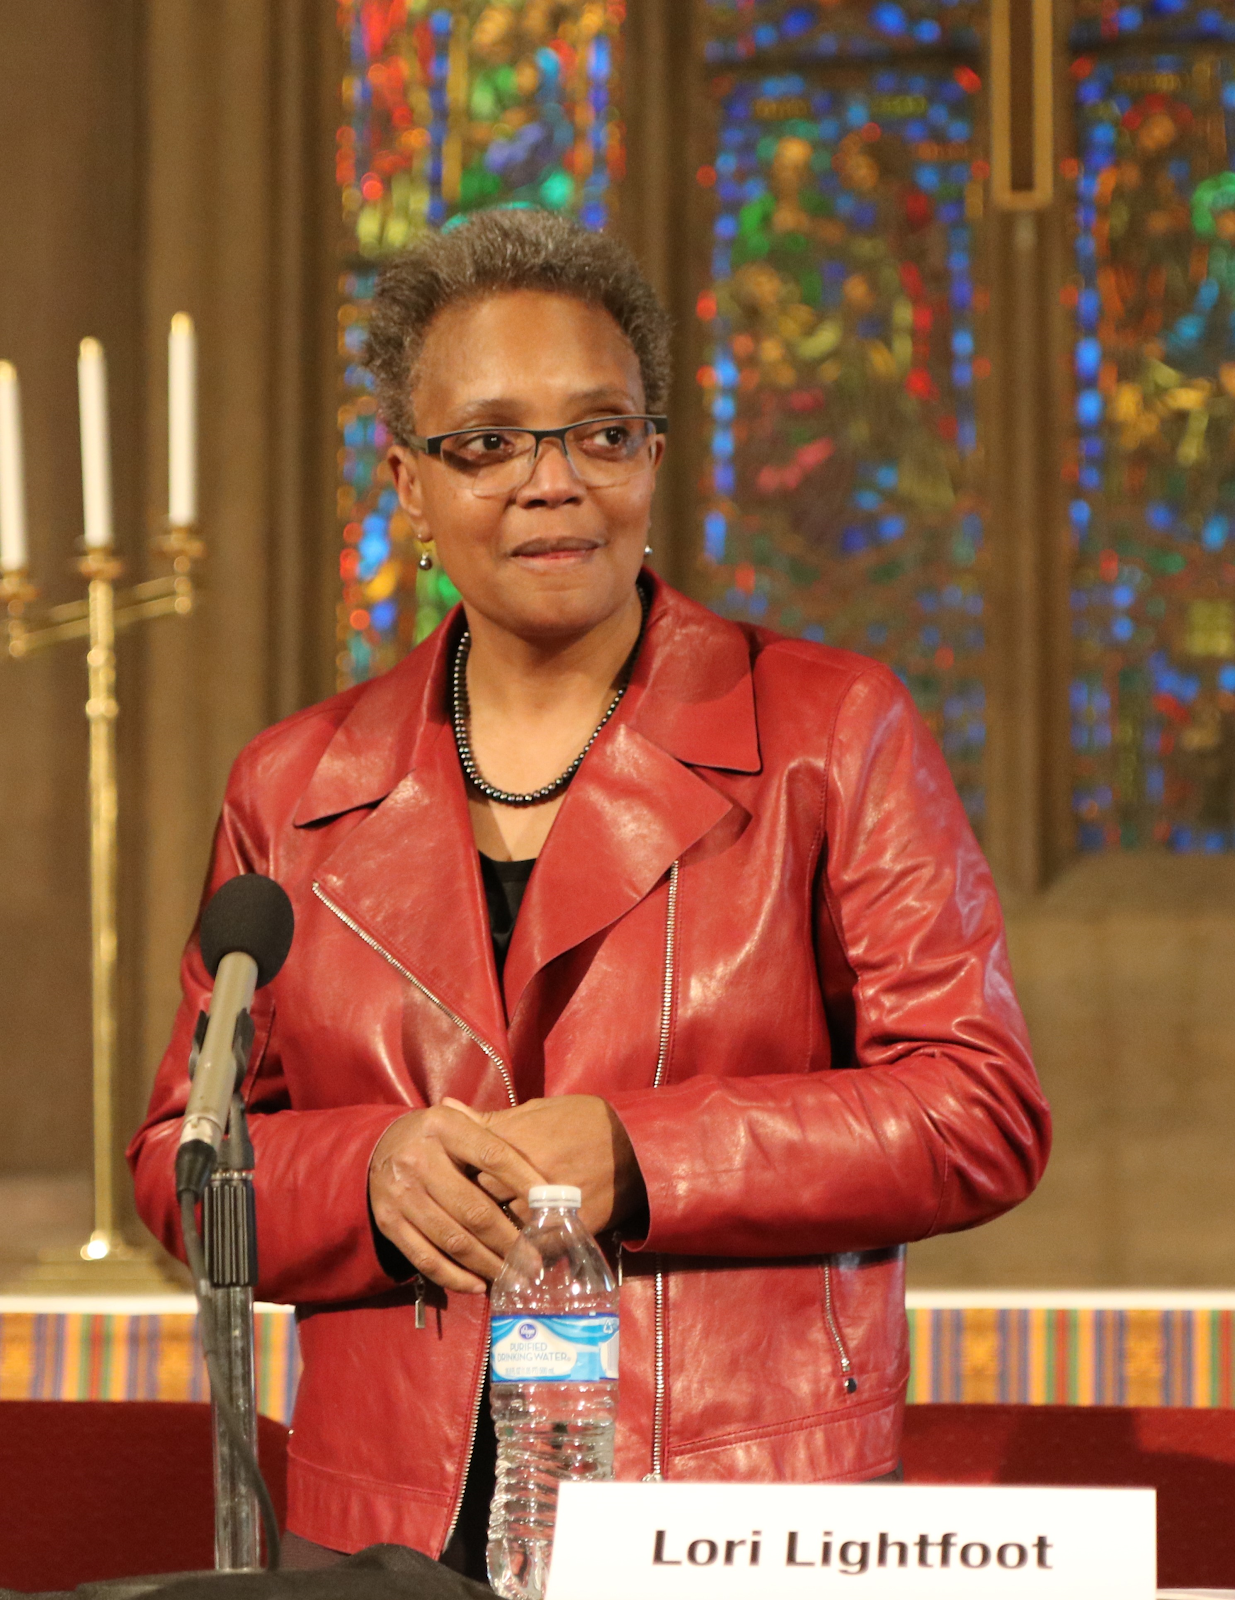 Lori Lightfoot at the Women's Mayoral Forum at the Chicago Temple, Saturday, February 2, 2019. Photo by Daniel X. O'Neil.